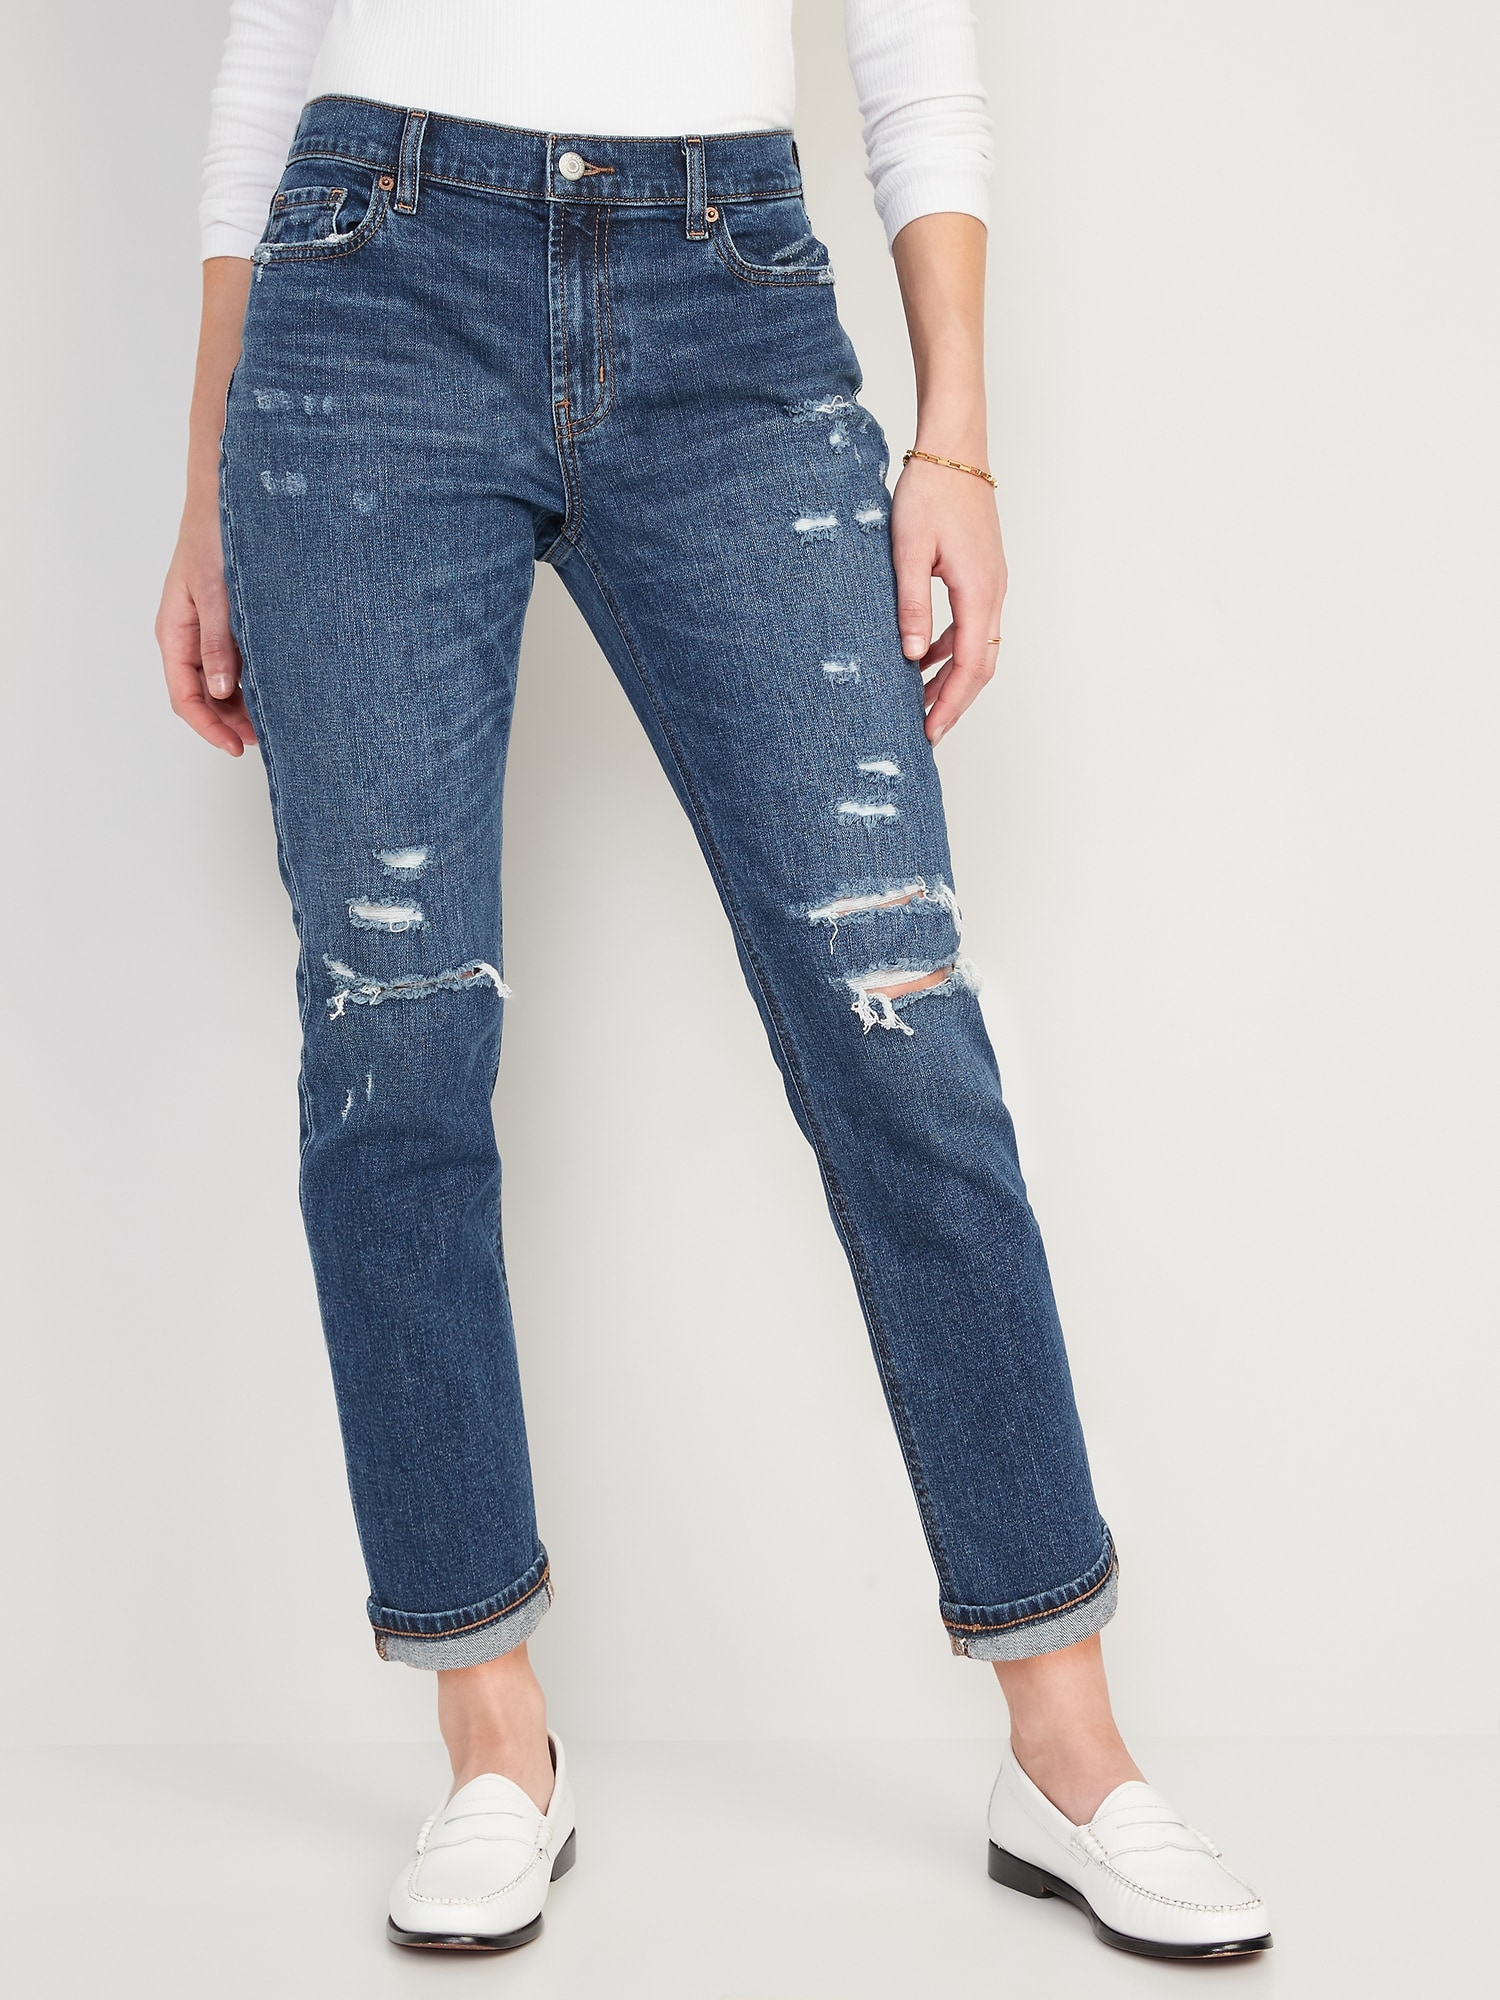 Old Navy Mid-Rise Boyfriend Straight Ripped Jeans for Women blue. 1